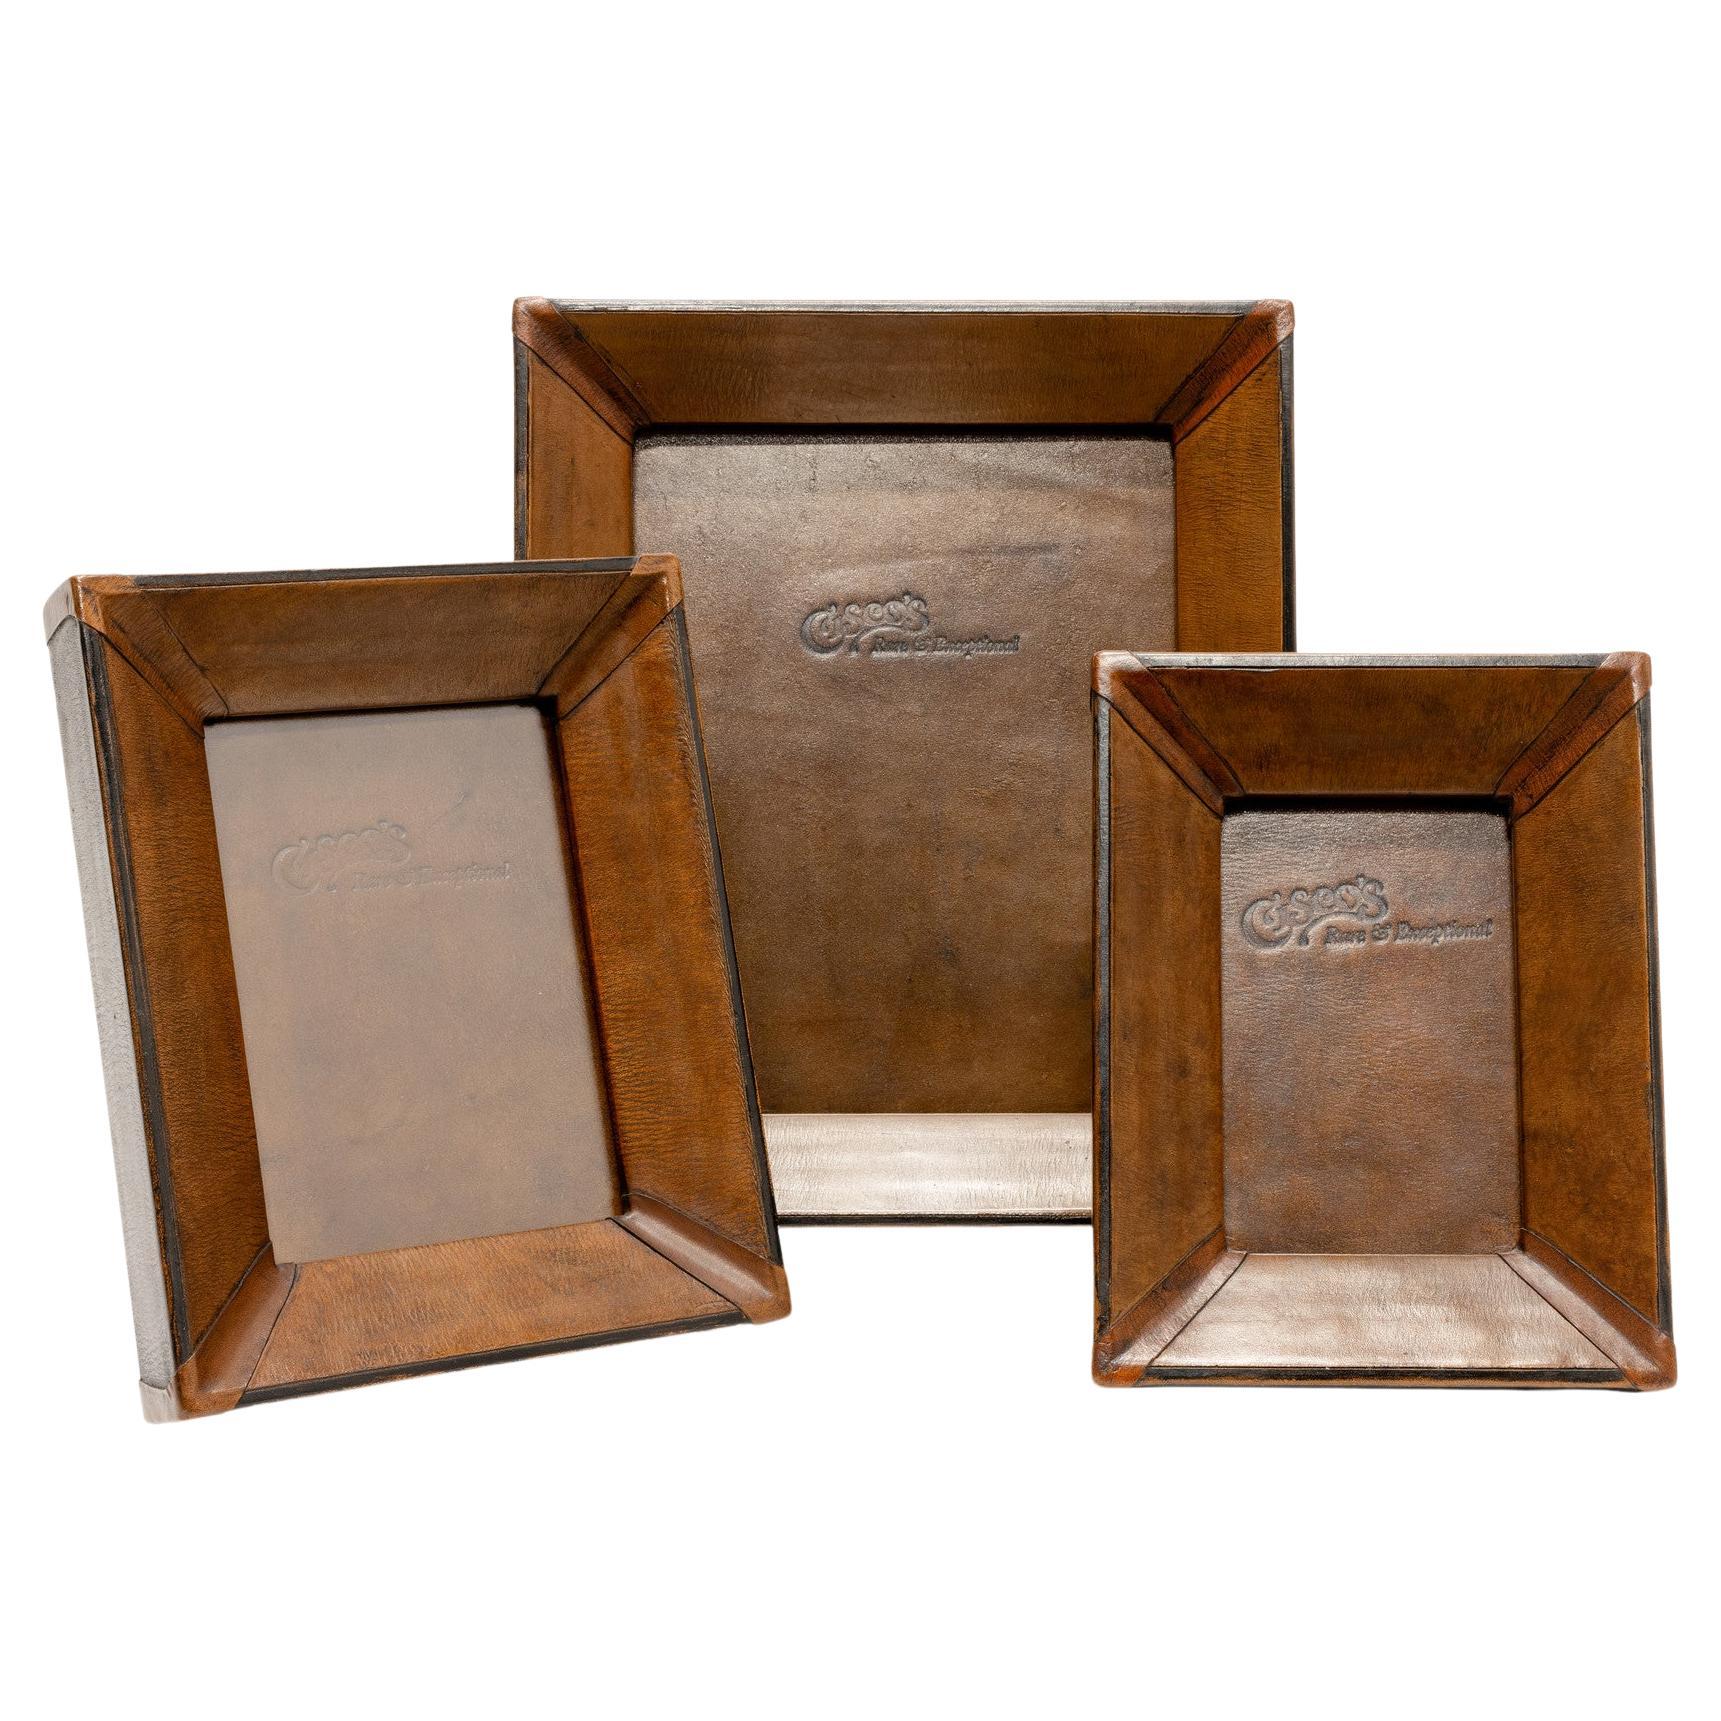 4x6 Medium Brown & Black Leather Tabletop Picture Frame- The Saddle Shop  For Sale